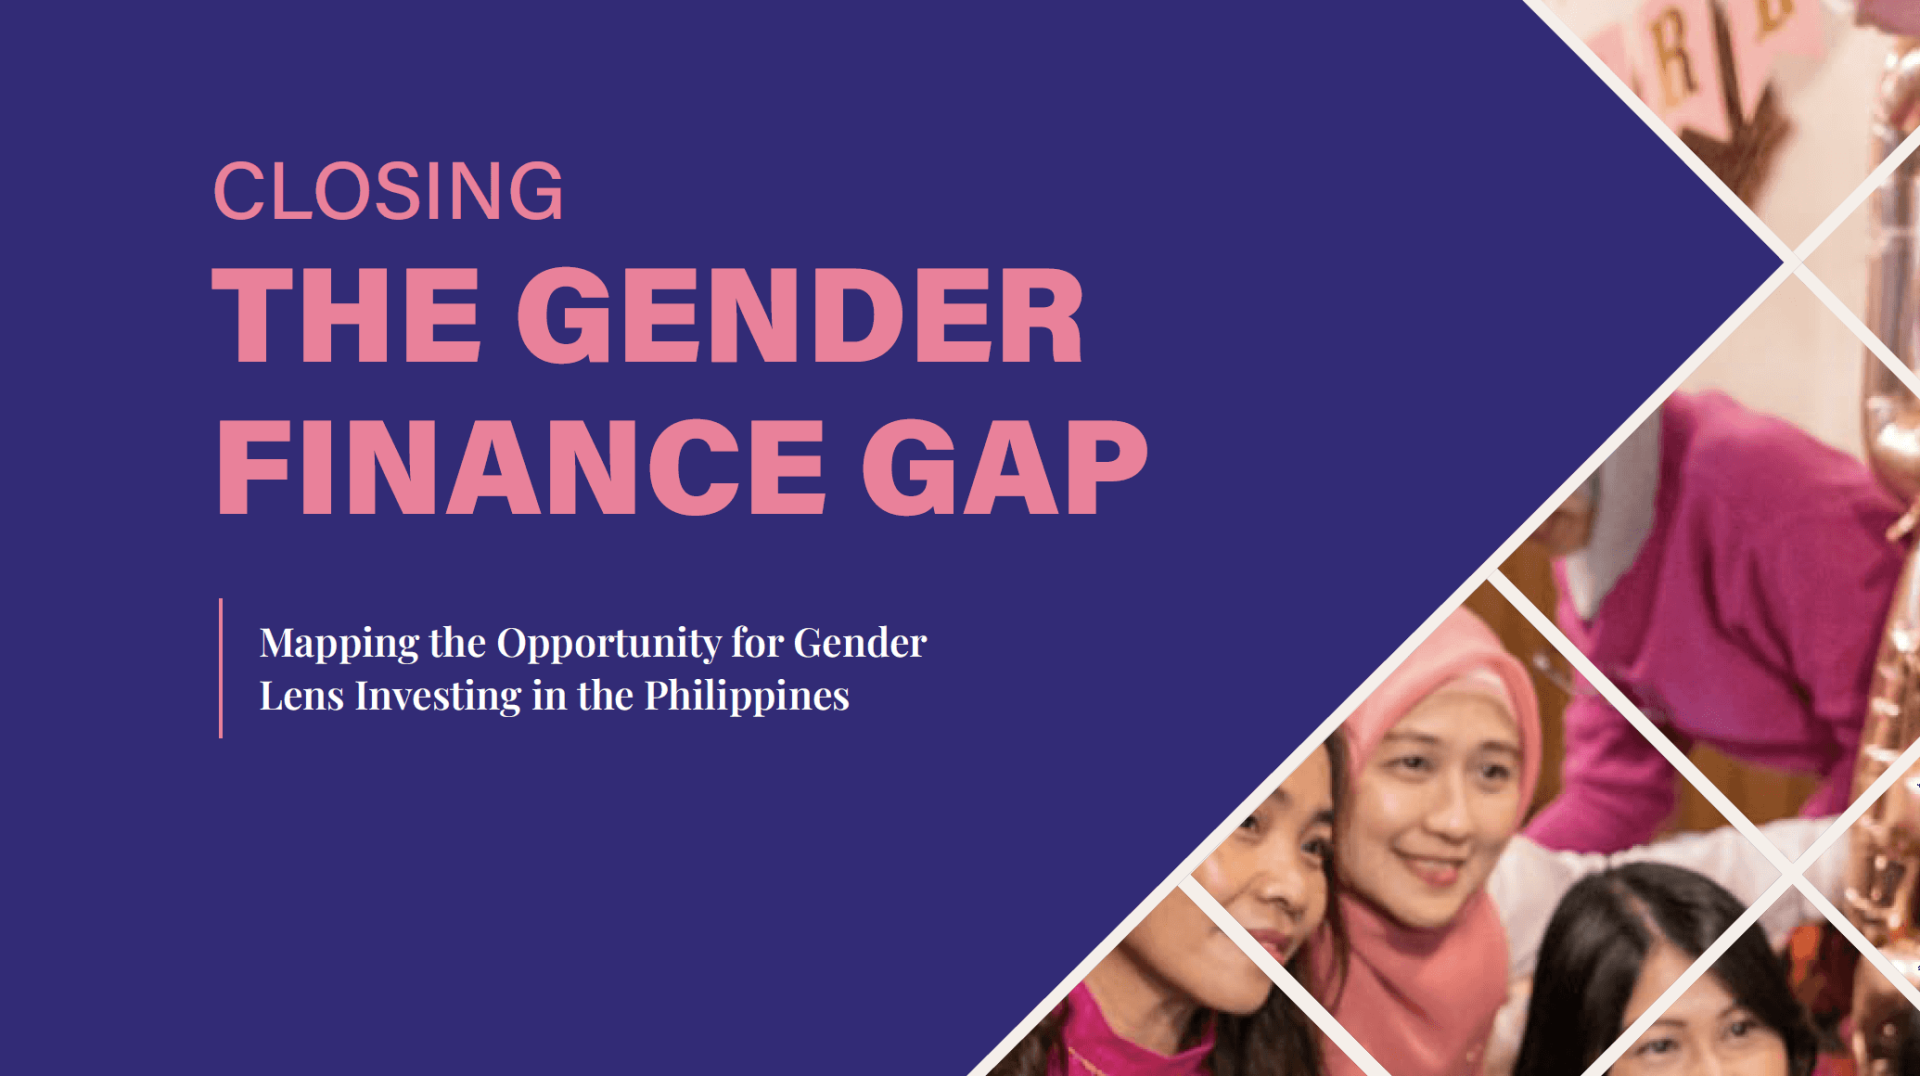 Closing the Gender Finance Gap: Mapping the Opportunity for Gender Lens Investing in the Philippines